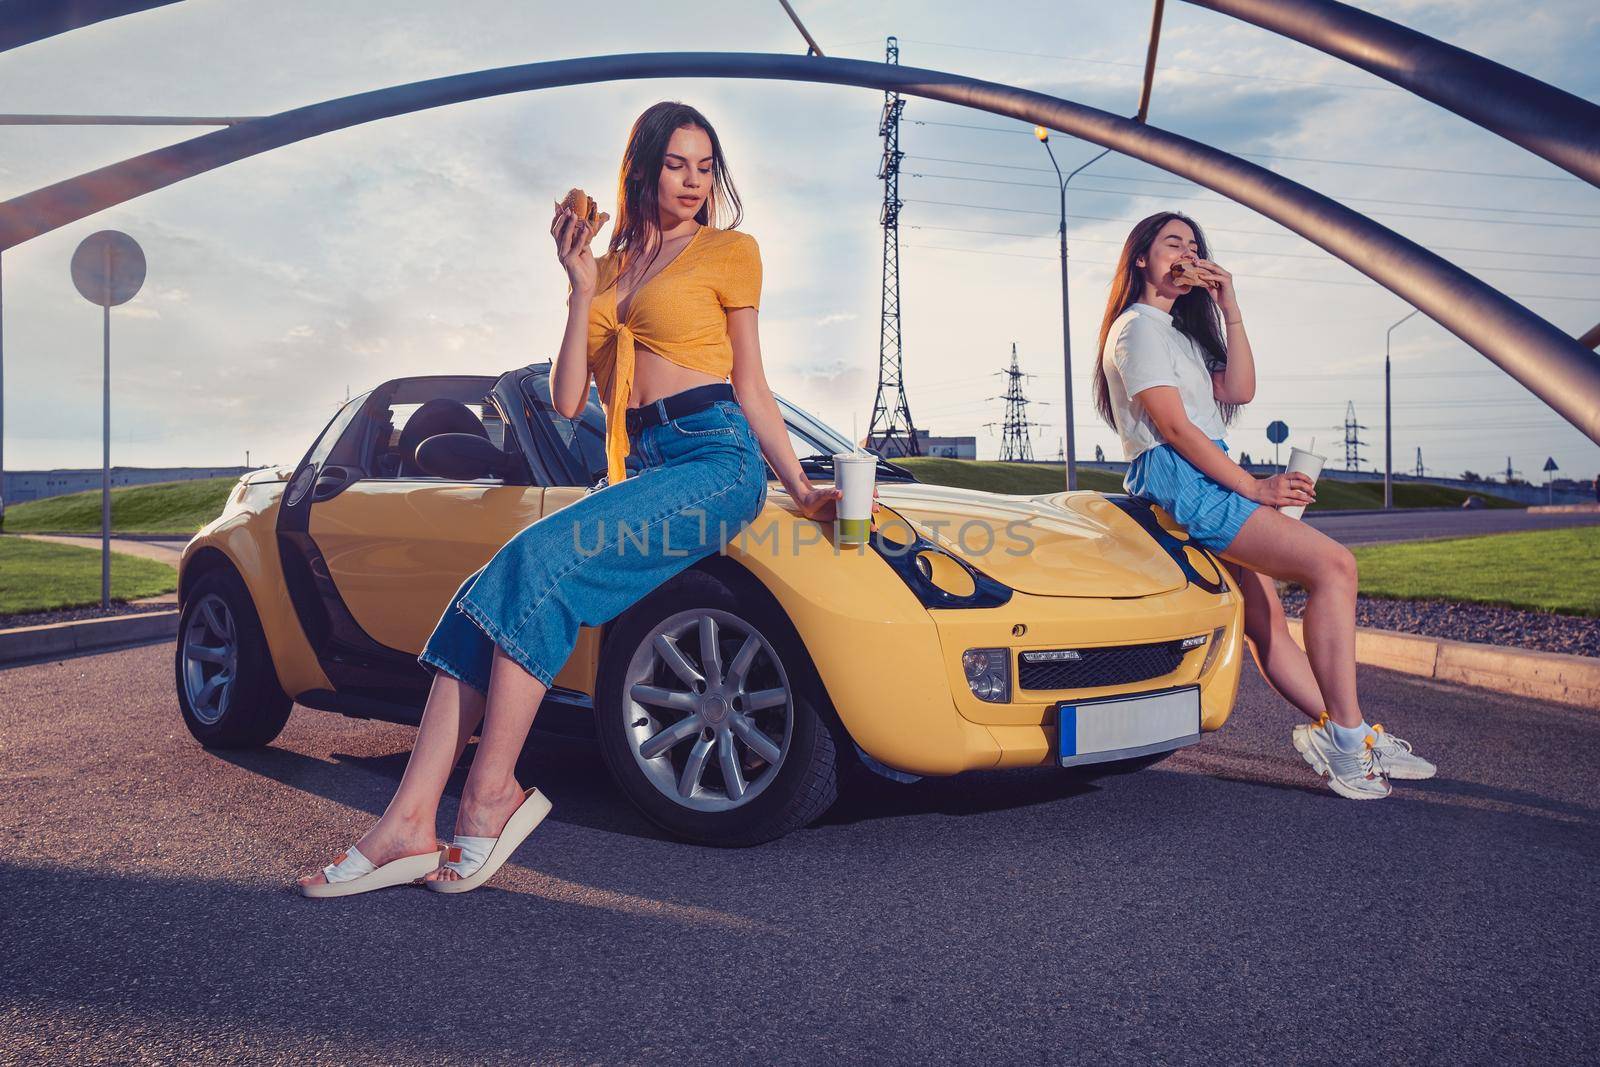 Attractive women in casual clothes are eating hamburgers and holding drinks in paper cups while leaning on the hood of yellow car cabrio. Fast food. Sunny day, iron pipes arch. Copy space, mock up